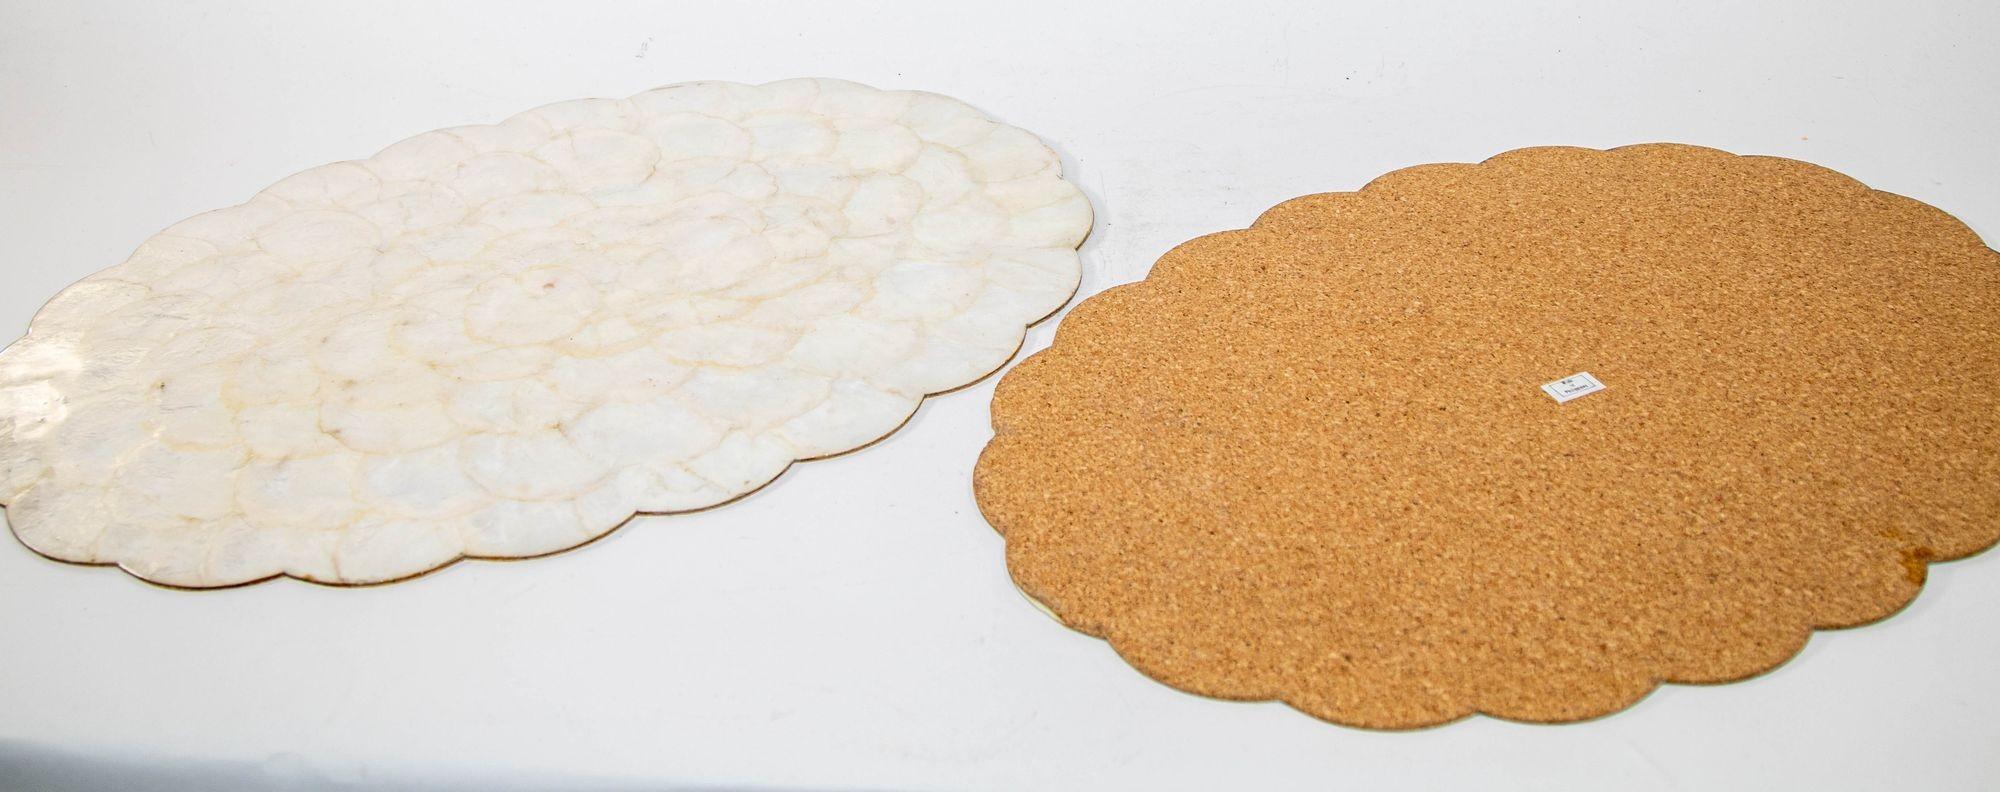 Hand-Crafted Vintage Hallie St Mary 2 Placemats in Natural Capiz Pearl Shell Scalloped Edge